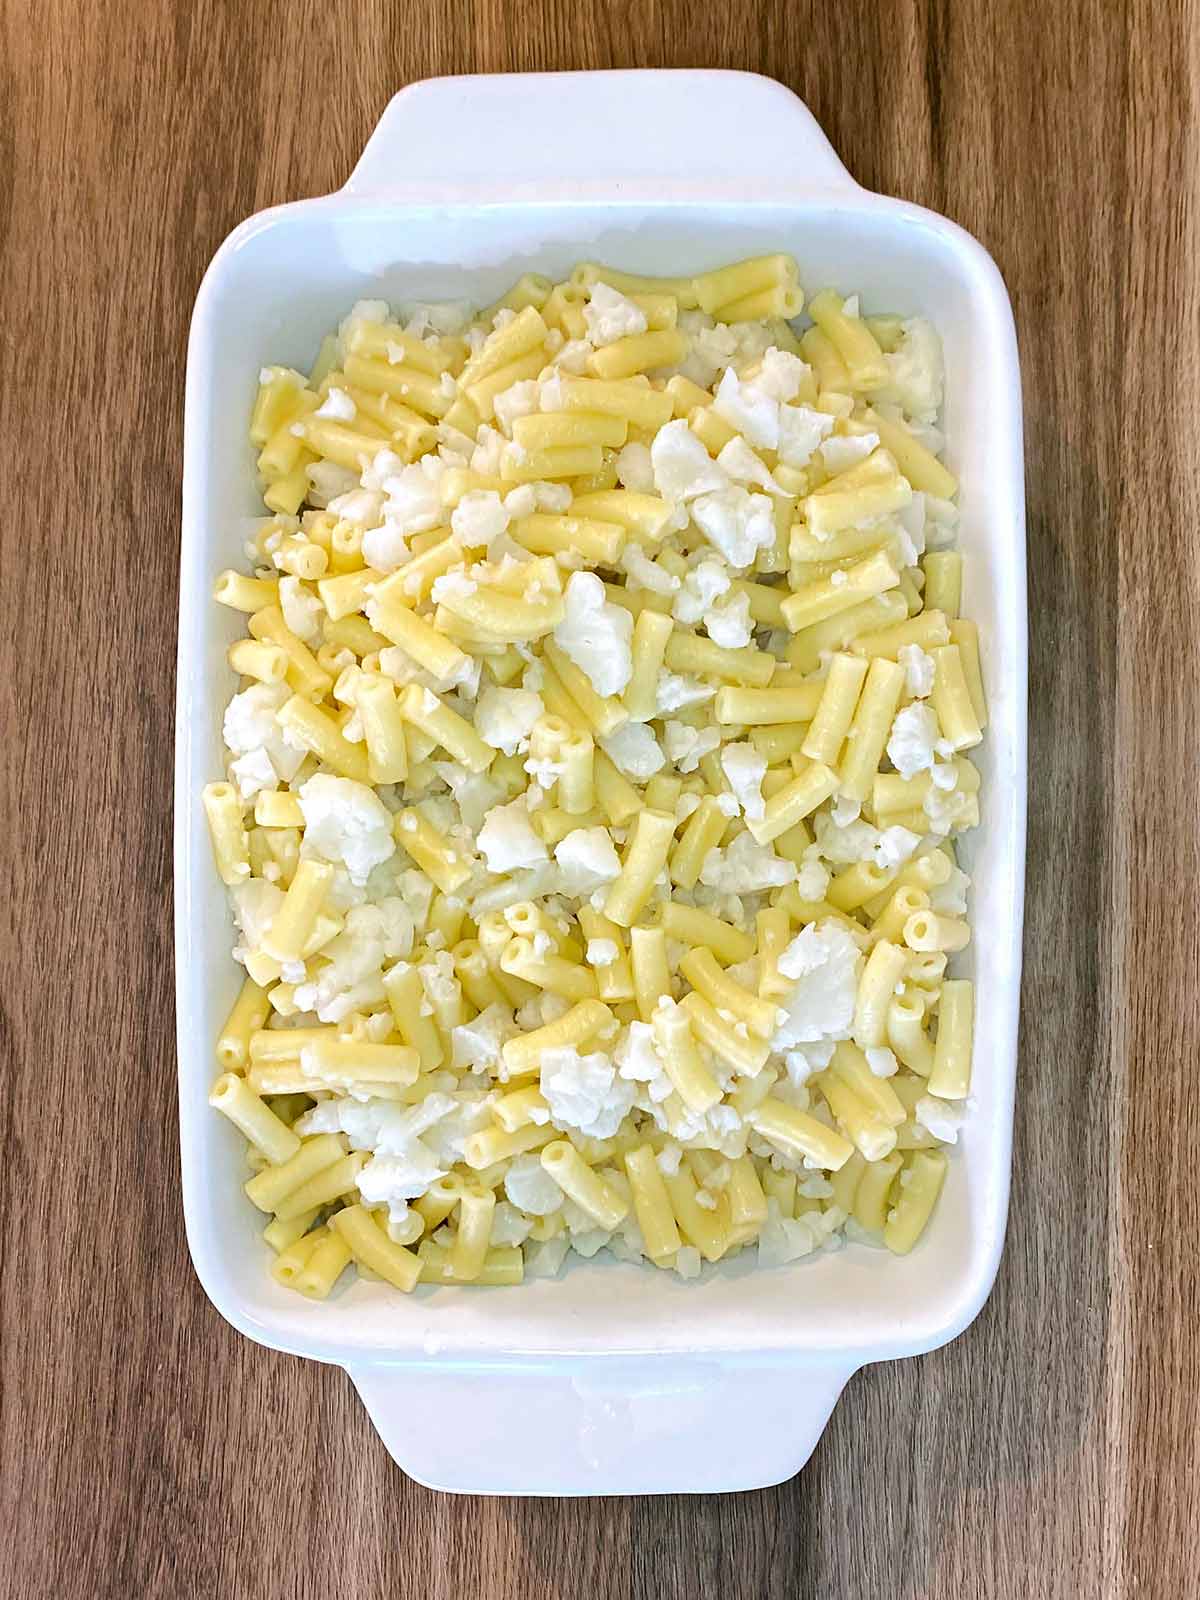 Drained pasta and cauliflower in a baking dish.